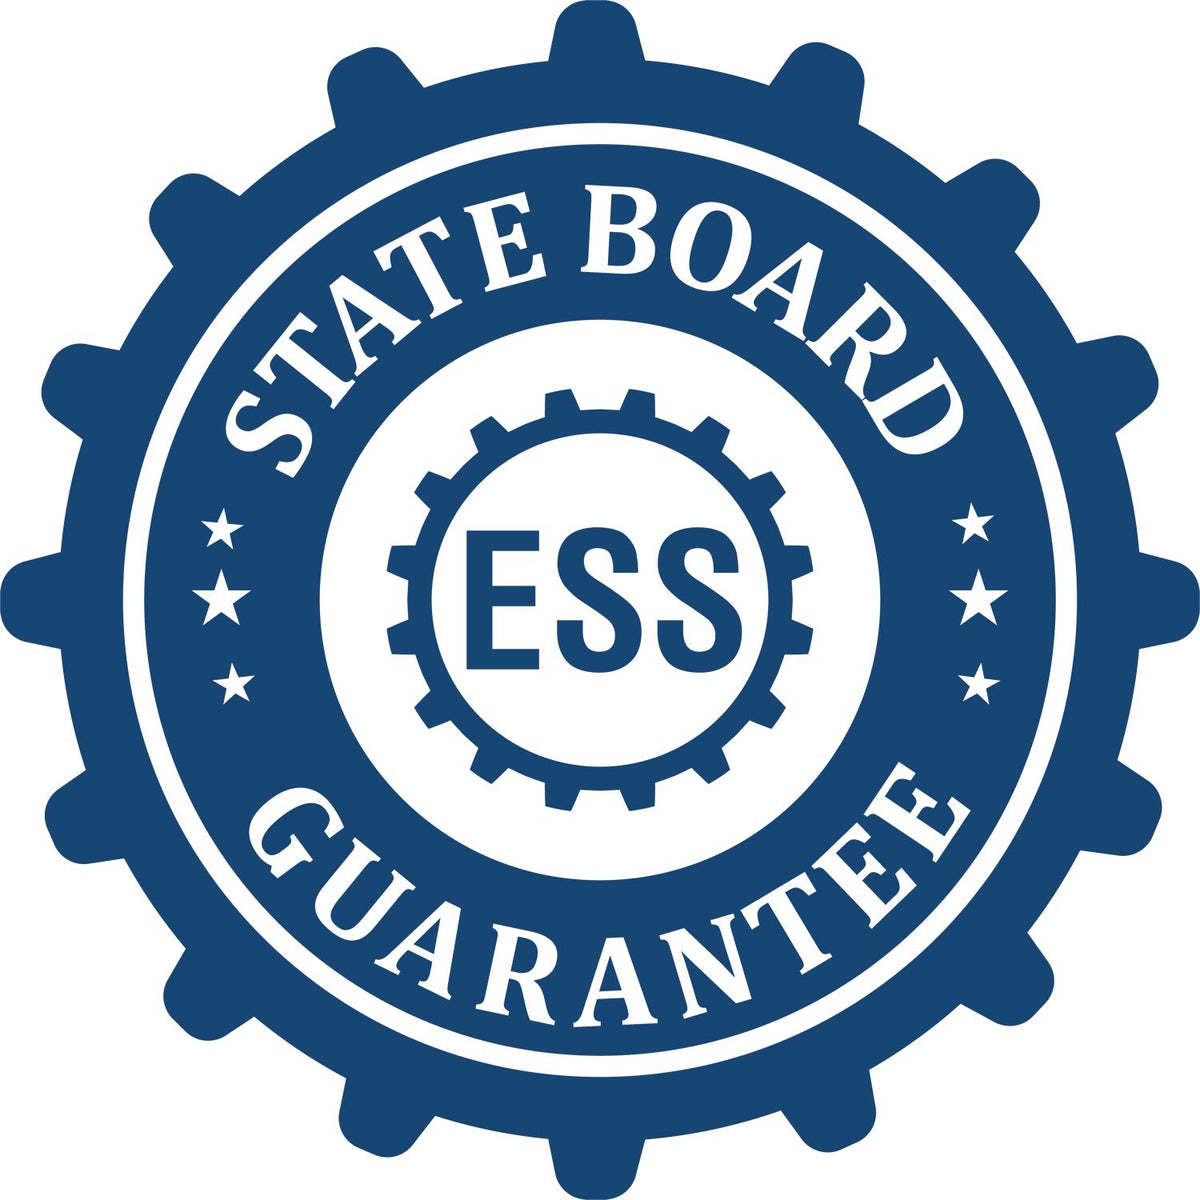 An emblem in a gear shape illustrating a state board guarantee for the Handheld Massachusetts Land Surveyor Seal product.